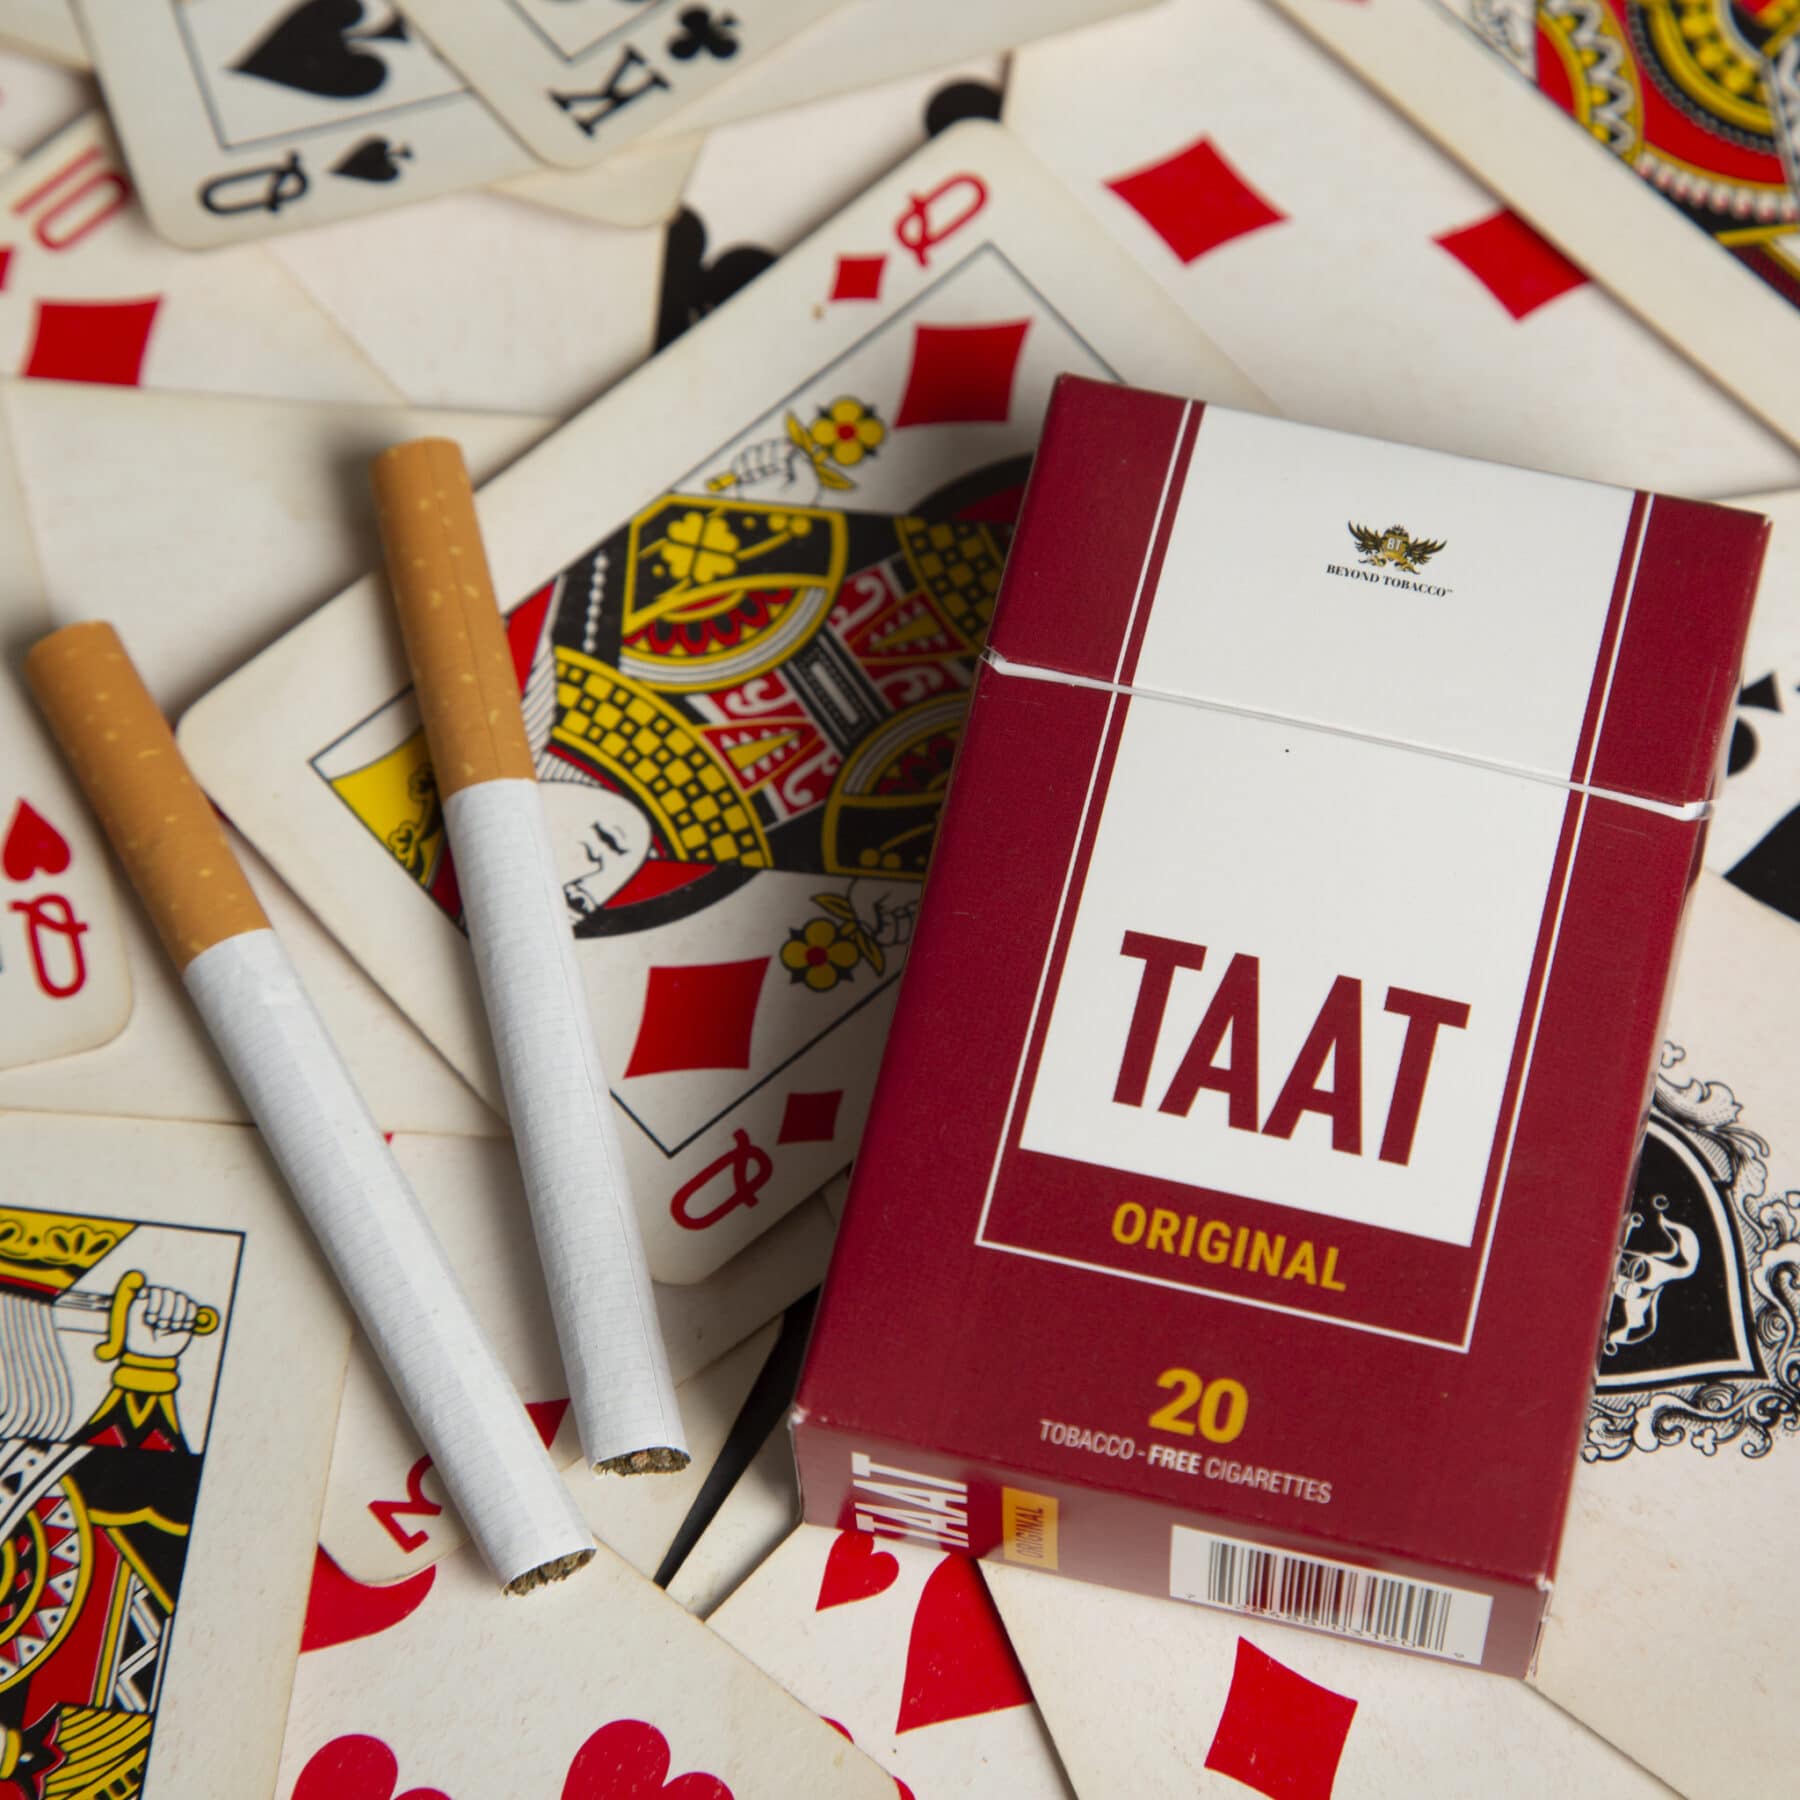 Free TAAT Tobacco & NicotineFree Cigarettes • Hey, It's Free!